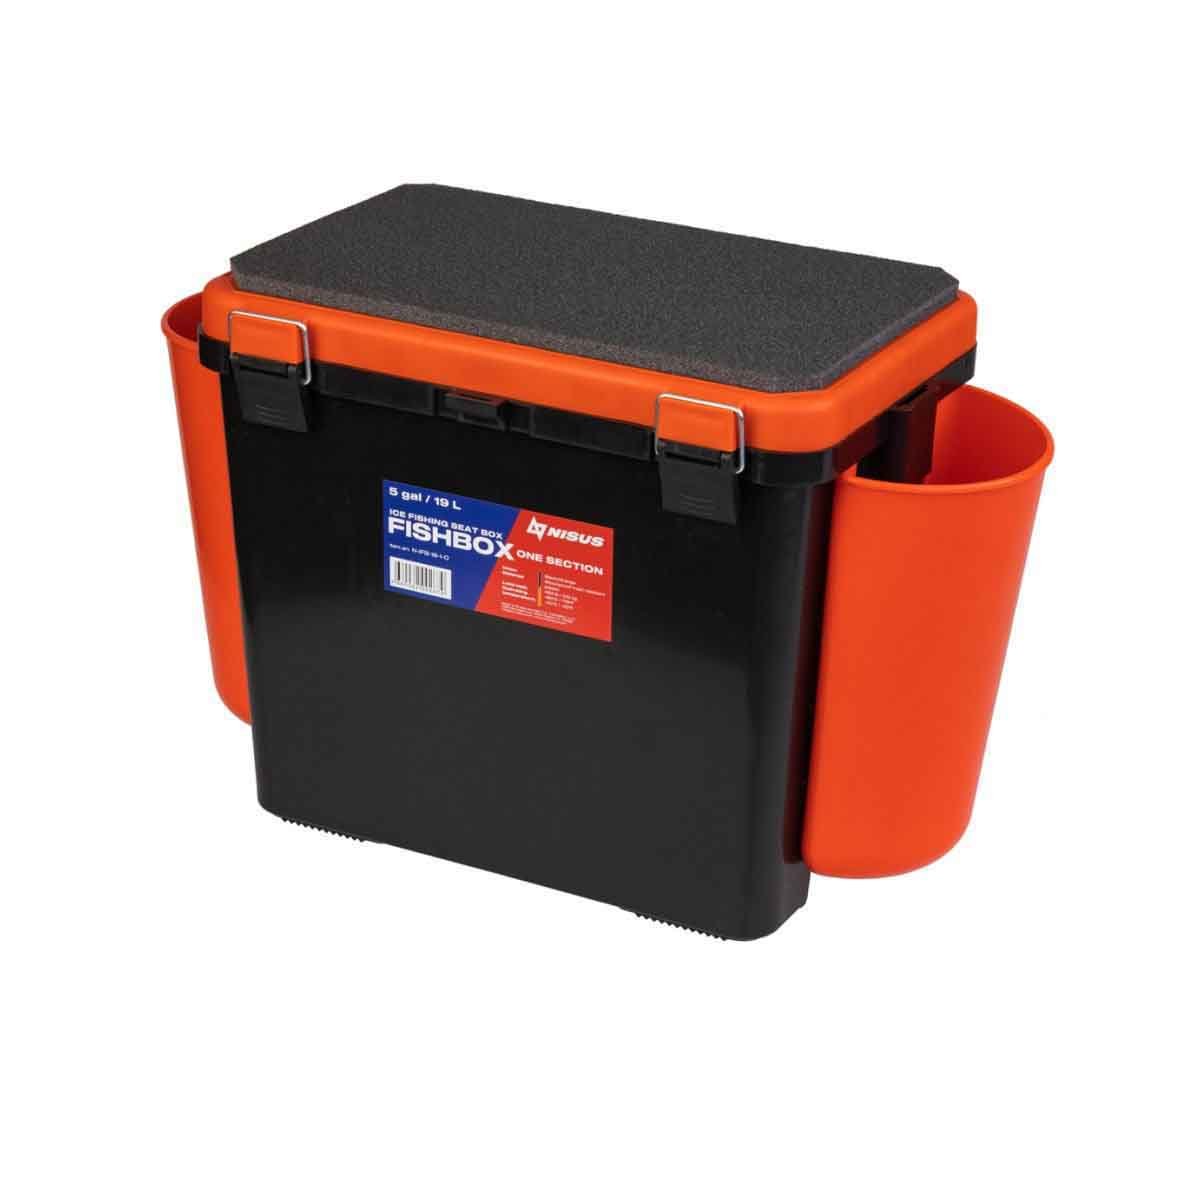 FishBox Large 5 gal SeatBox for Ice Fishing Tackle and Gear, orange